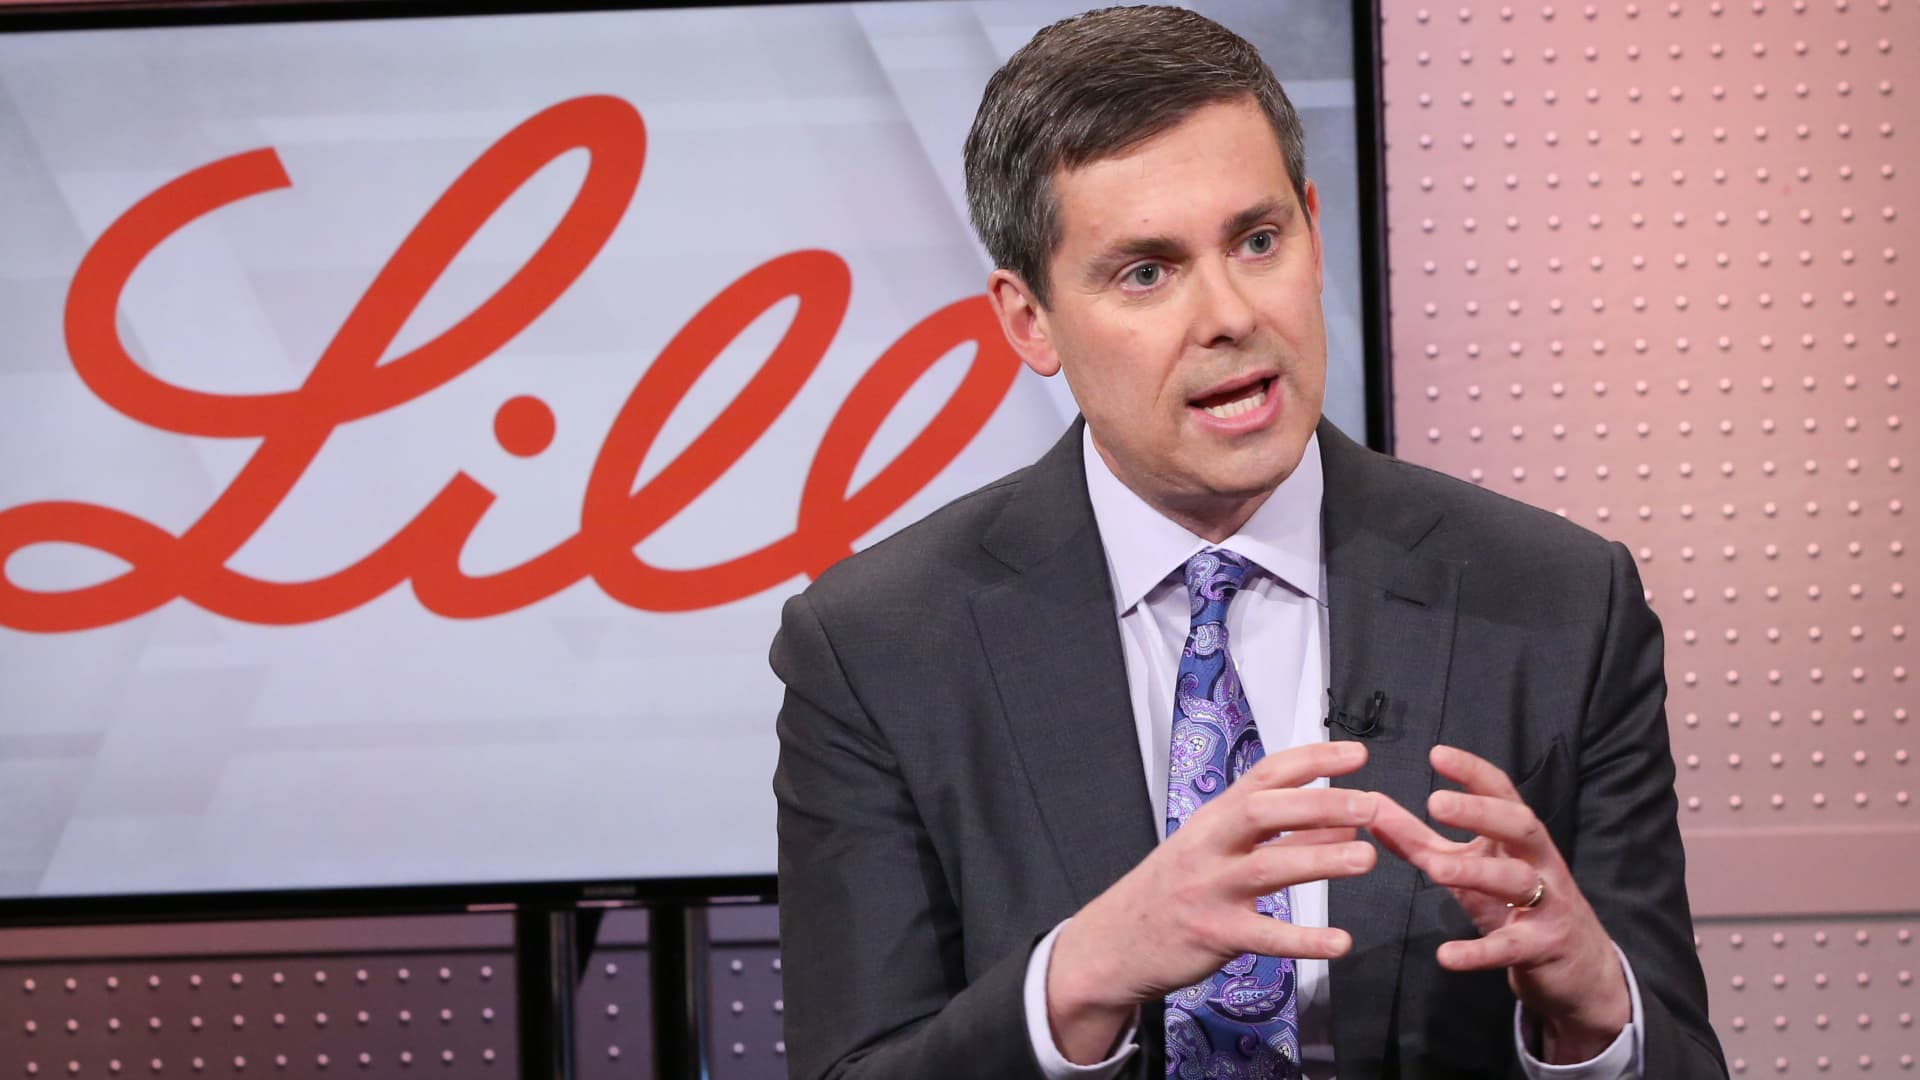 Eli Lilly's direct drug sales alone may not upend the industry, but others could follow suit